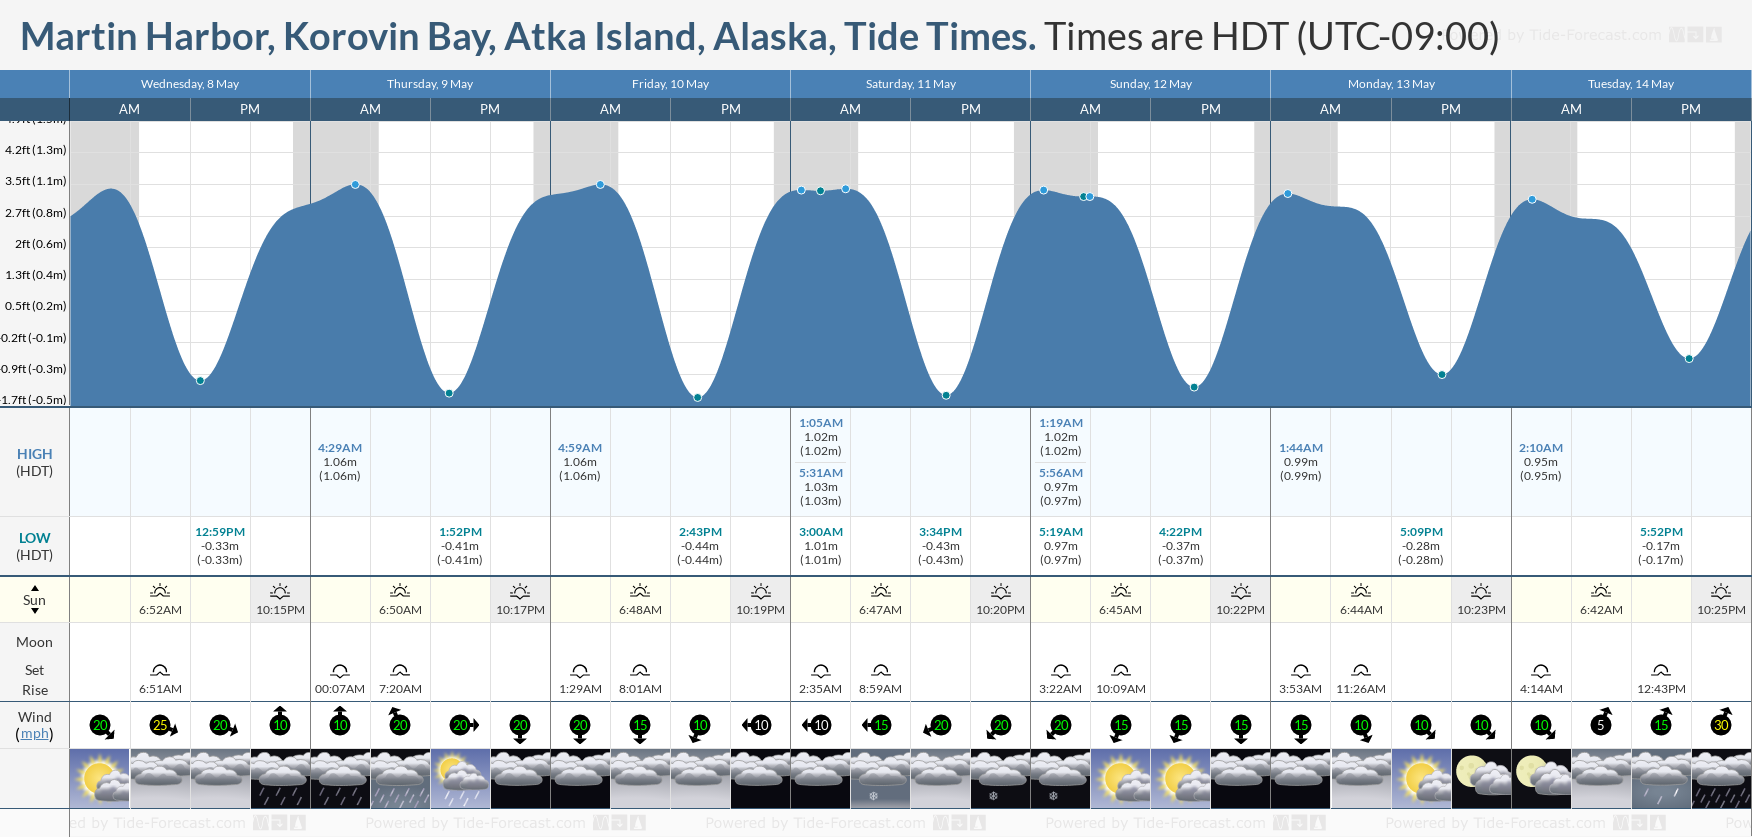 Martin Harbor, Korovin Bay, Atka Island, Alaska Tide Chart including high and low tide tide times for the next 7 days